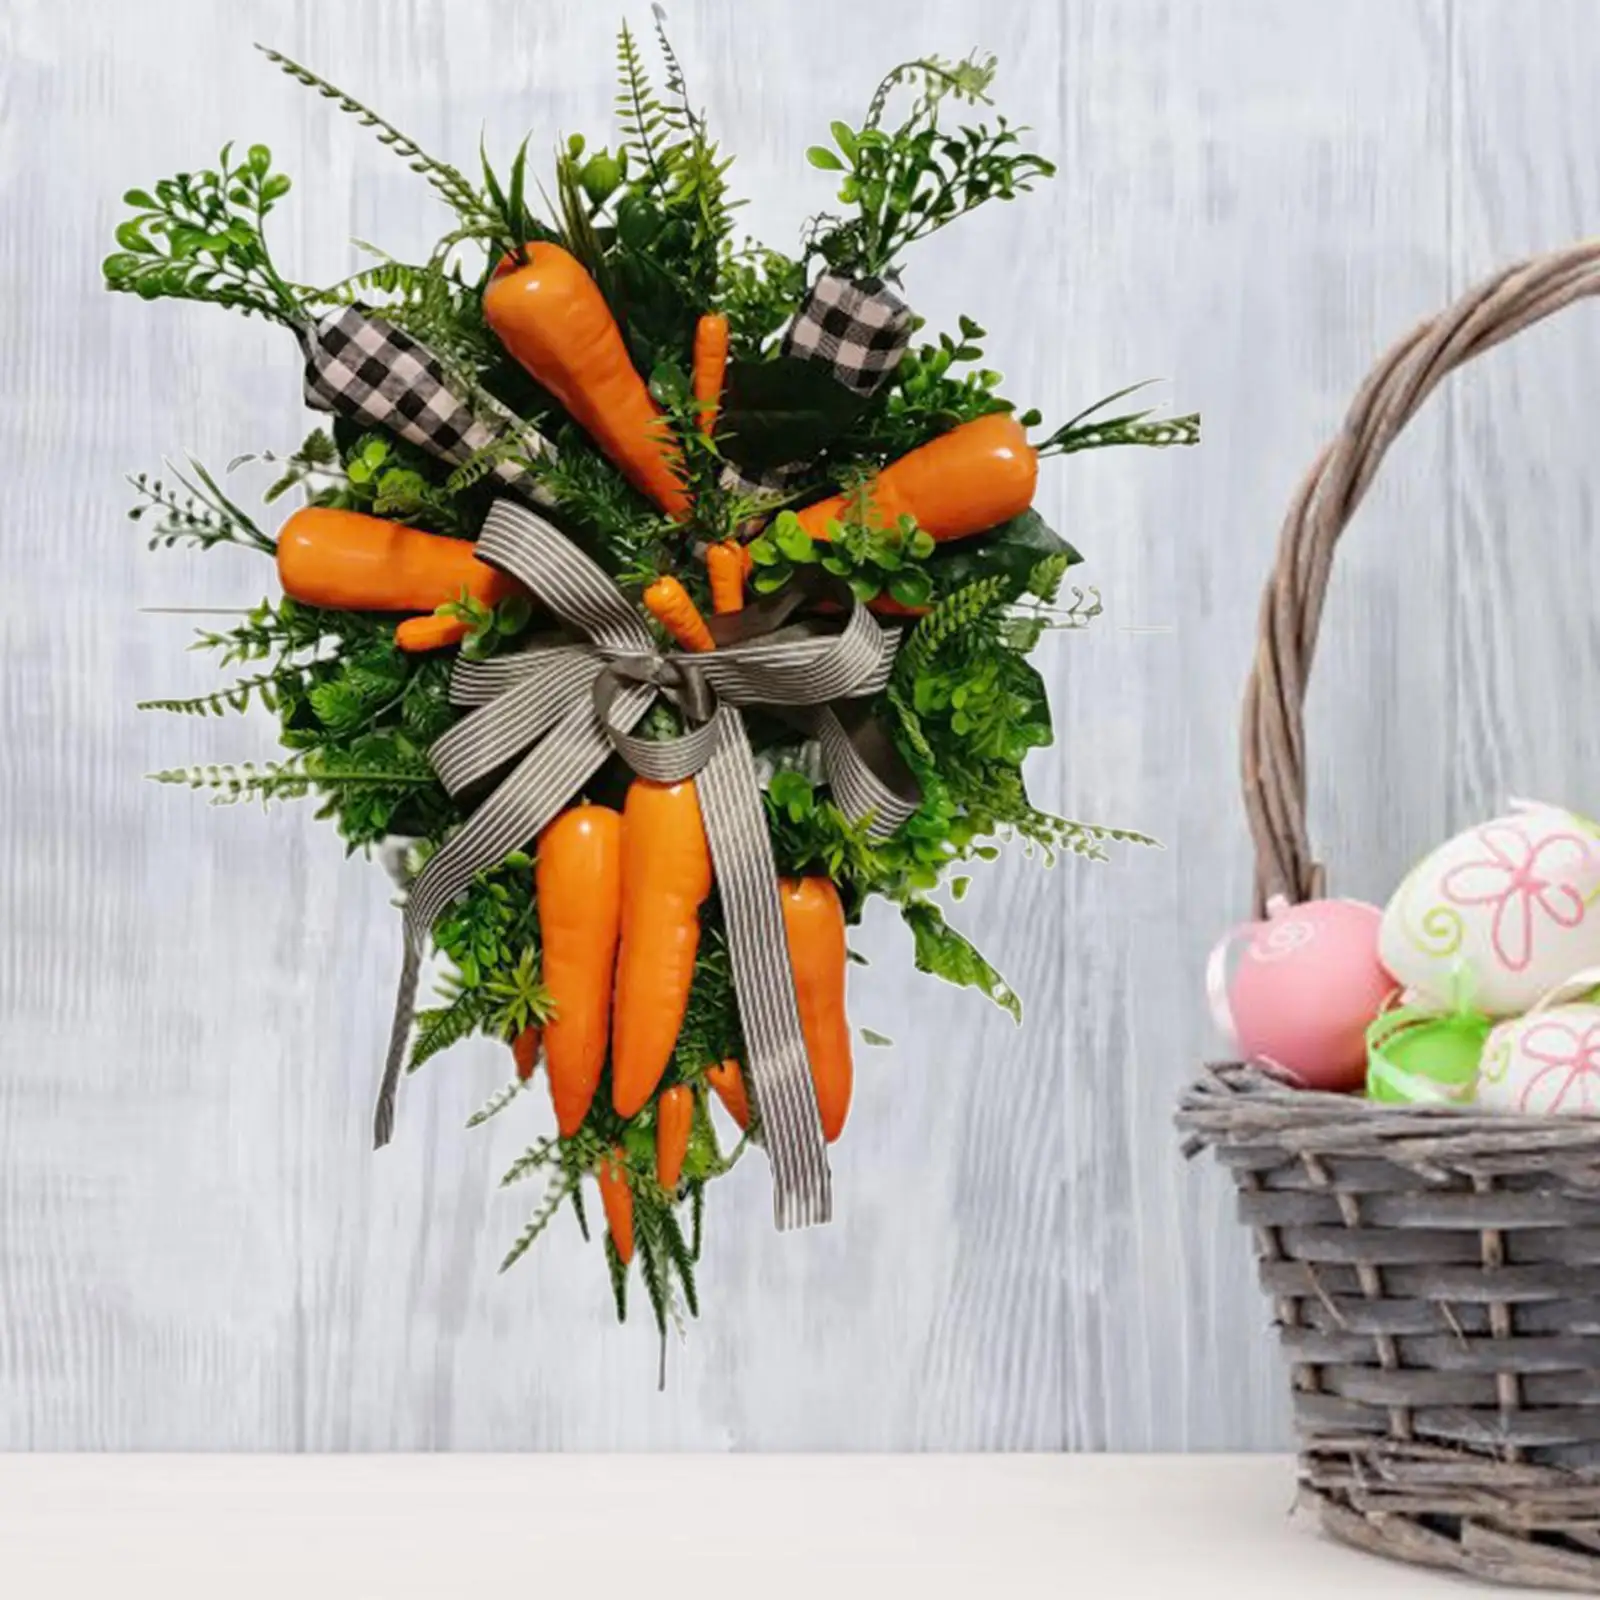  Artificial Easter Carrot Wreath Foam Carrots Wall Hanging Garland with Stripe Decor for Windows 7.5x4.3inch